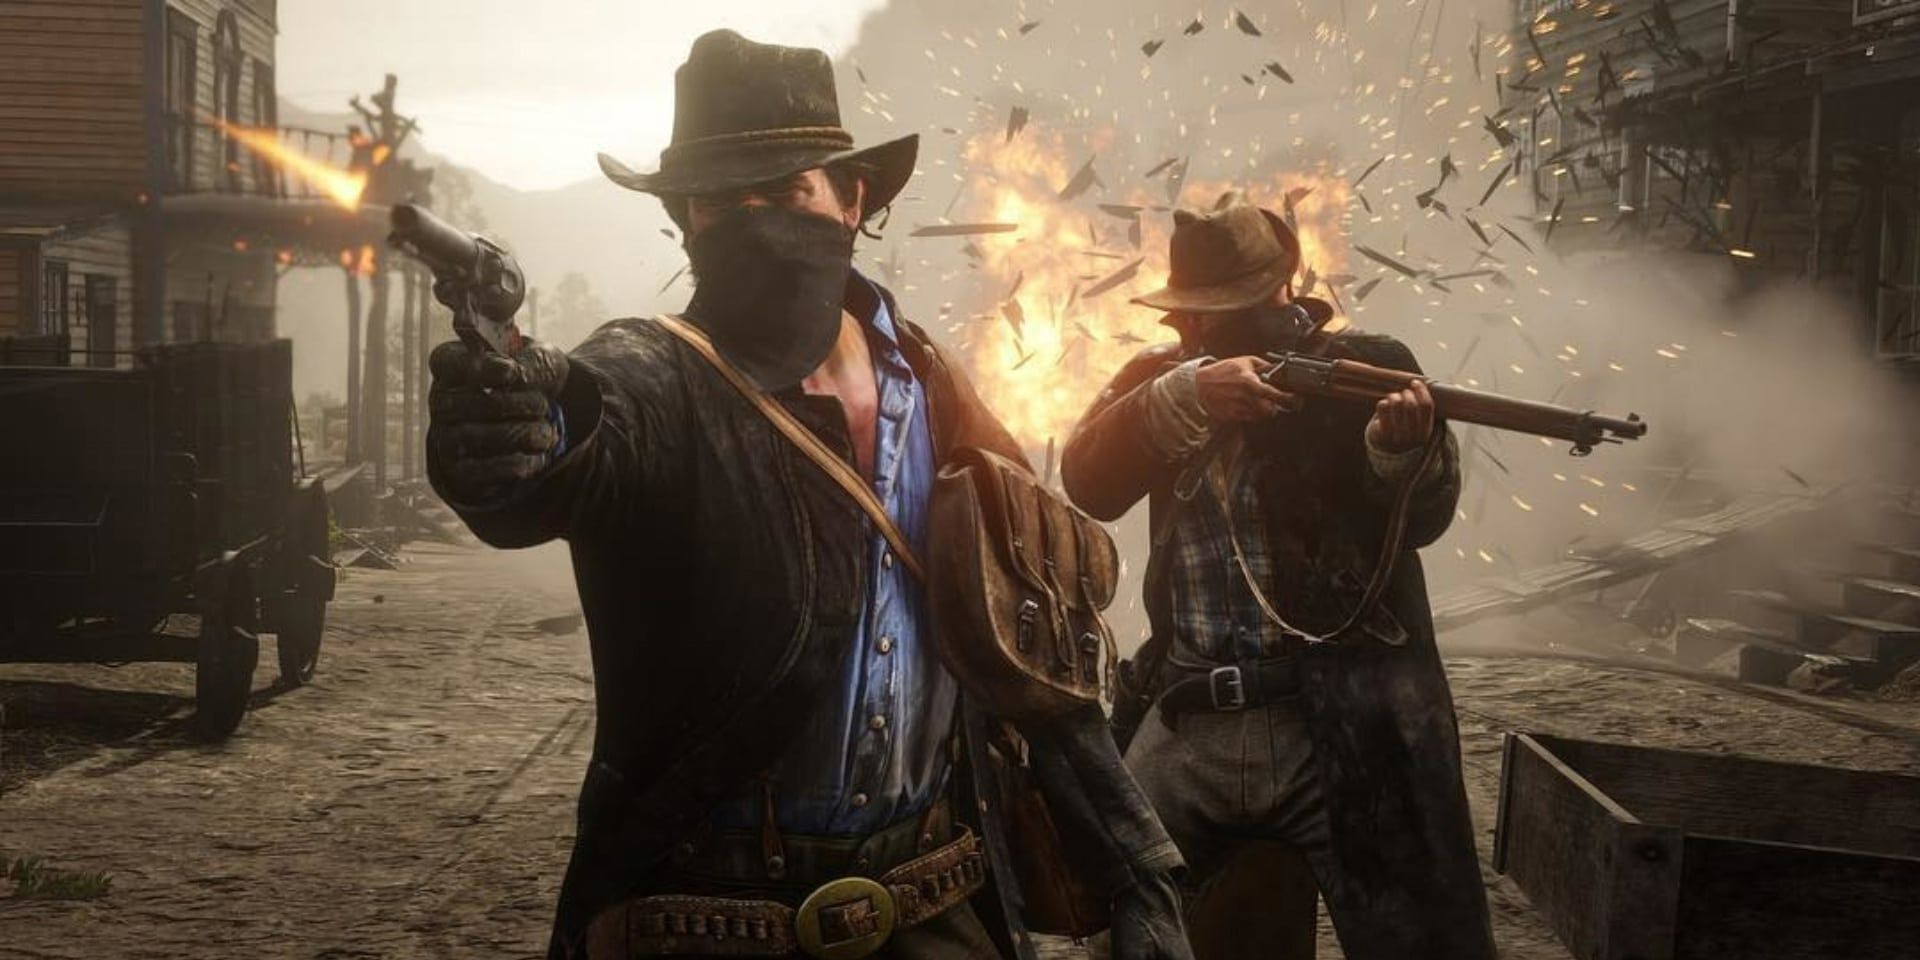 A cutscene during the main quest in Red Dead Redemption 2